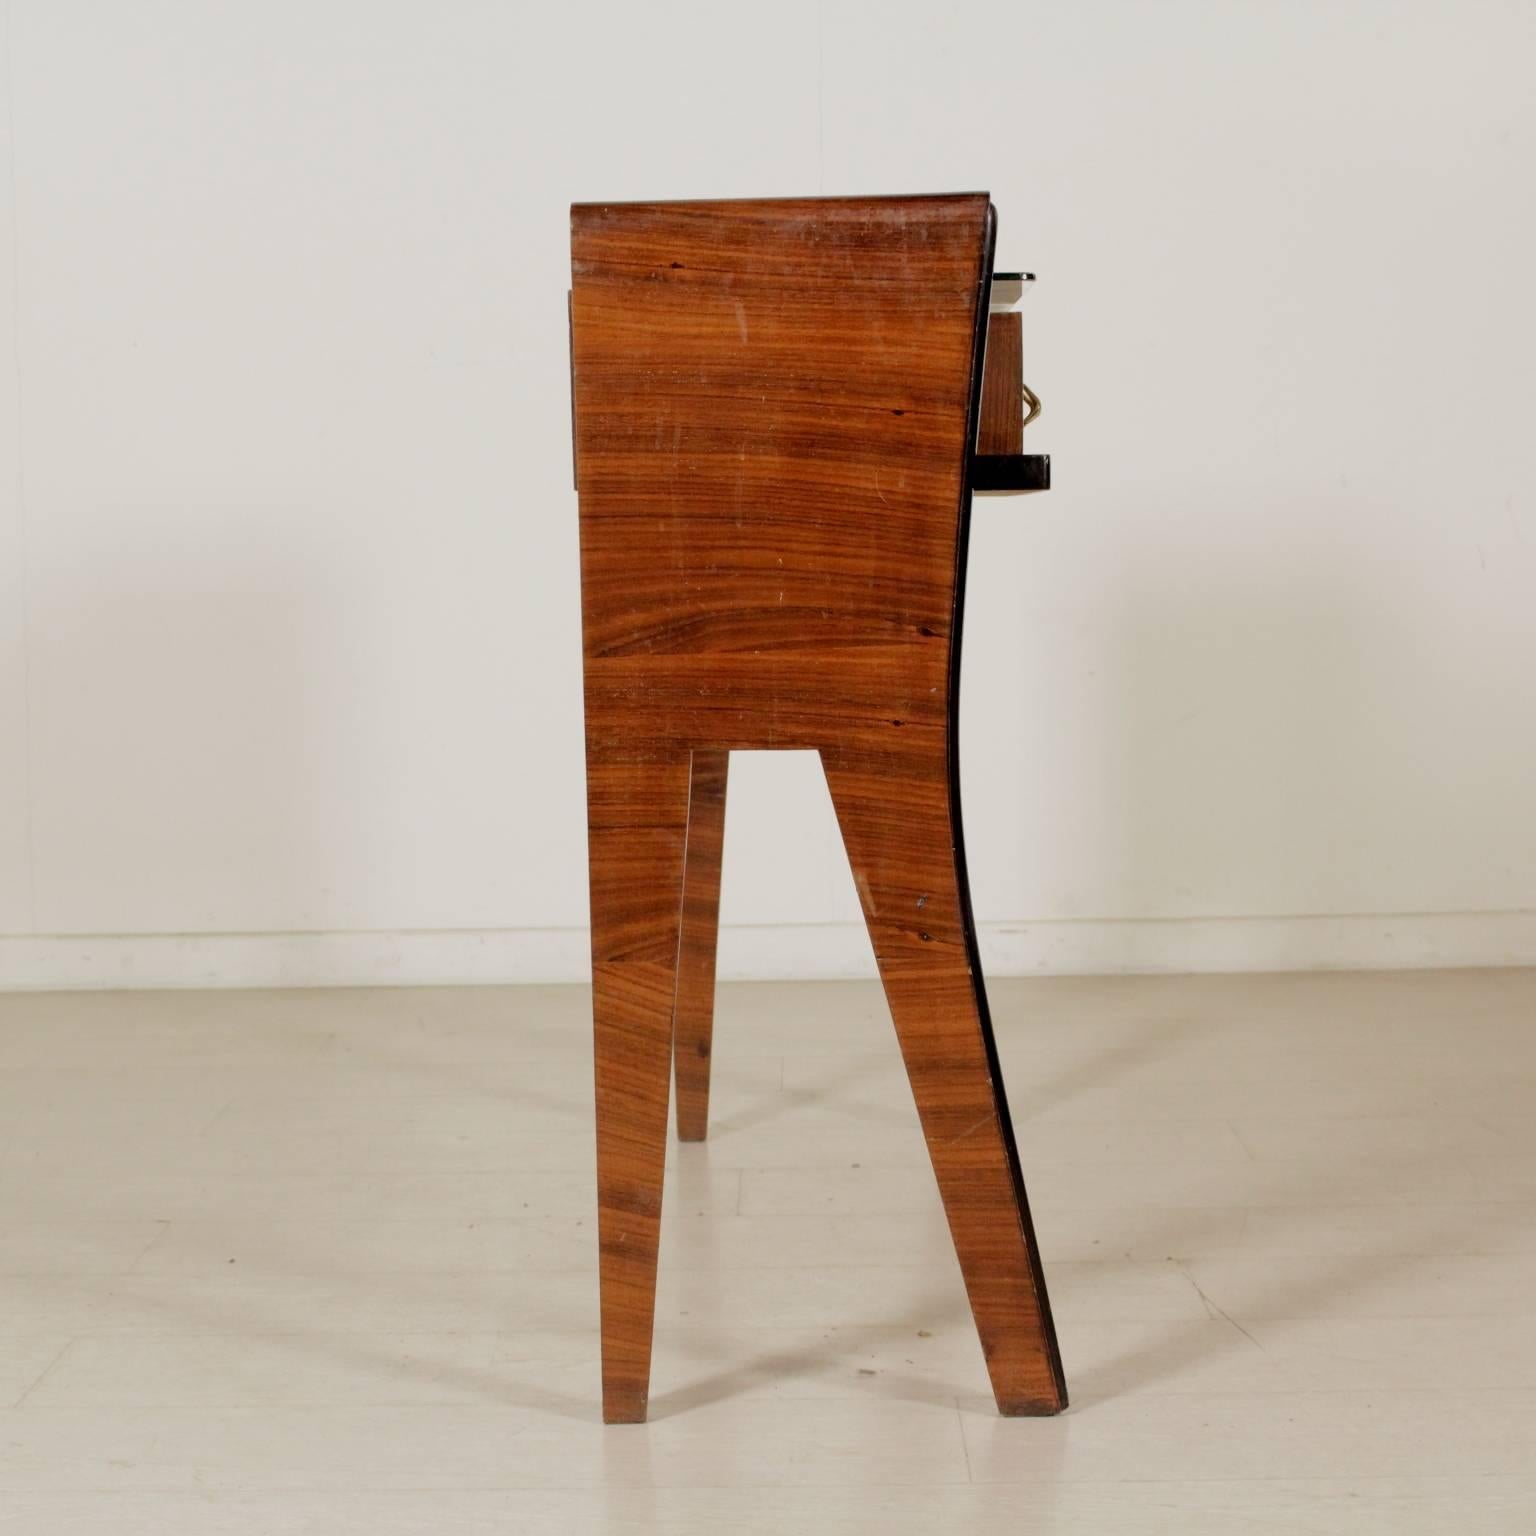 A console, rosewood veneer, glass. Manufactured in Italy, 1950s.